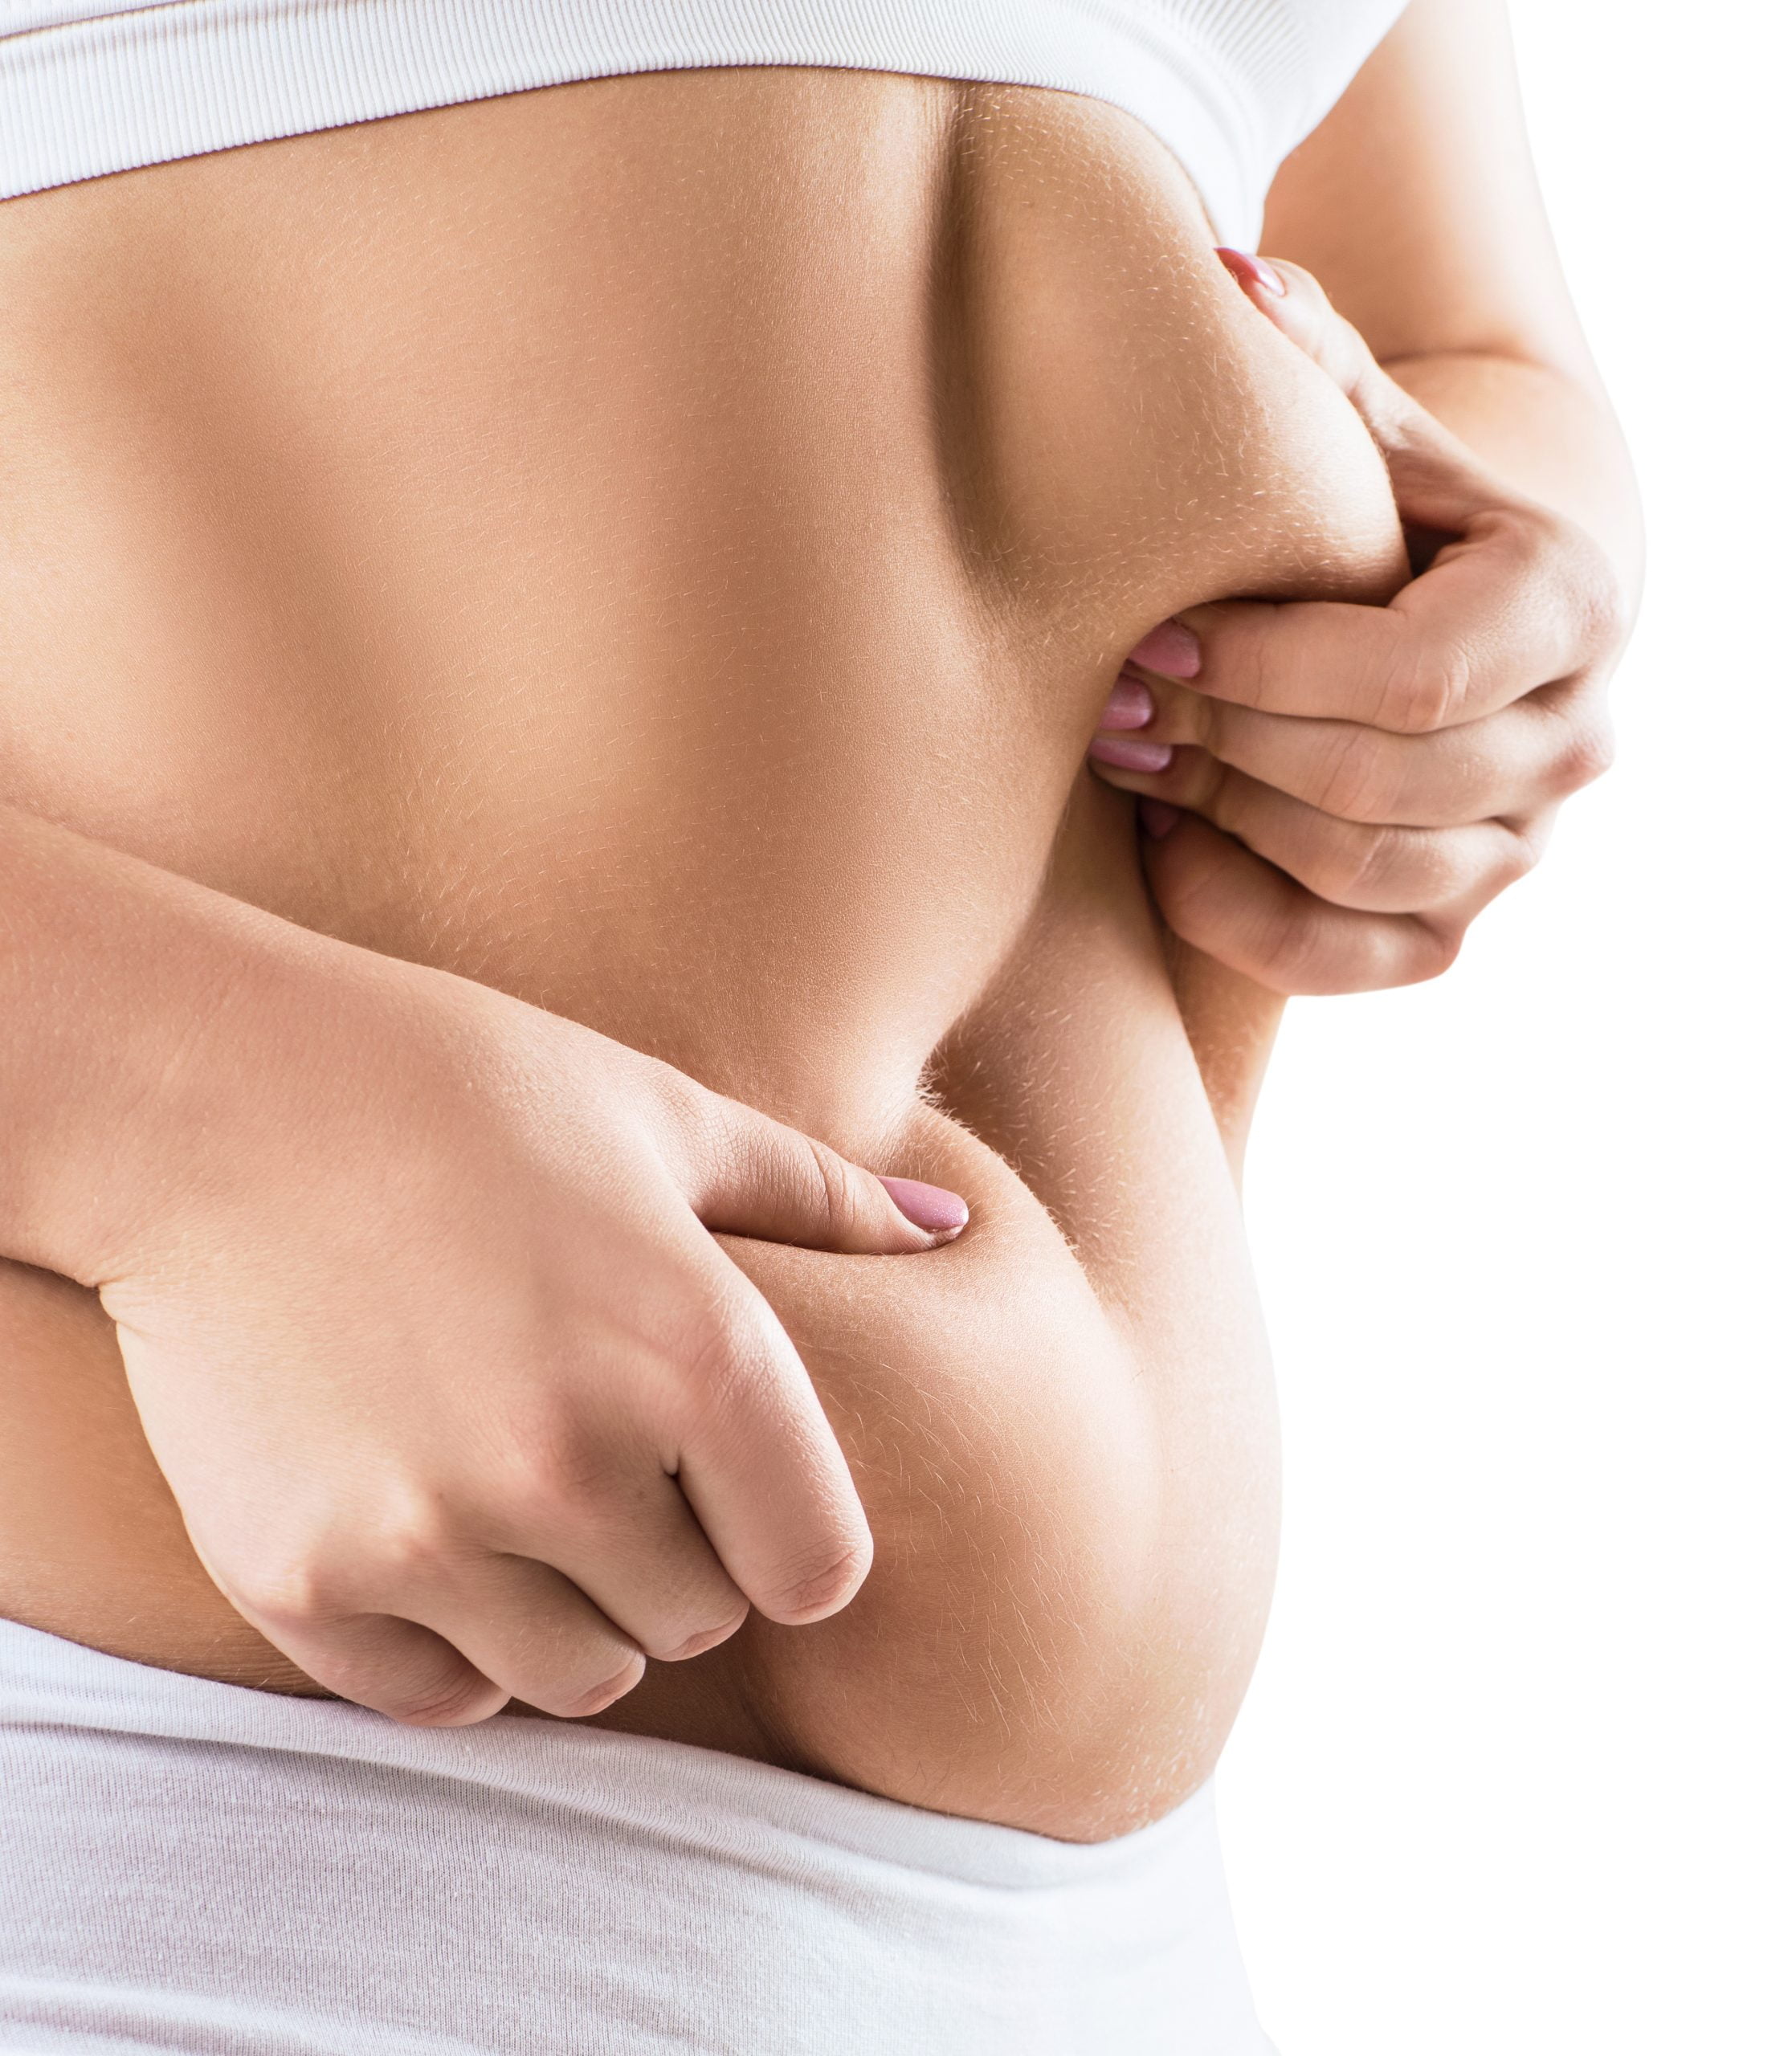 Need to Get Rid of Loose Skin After Weight Loss? Read This!